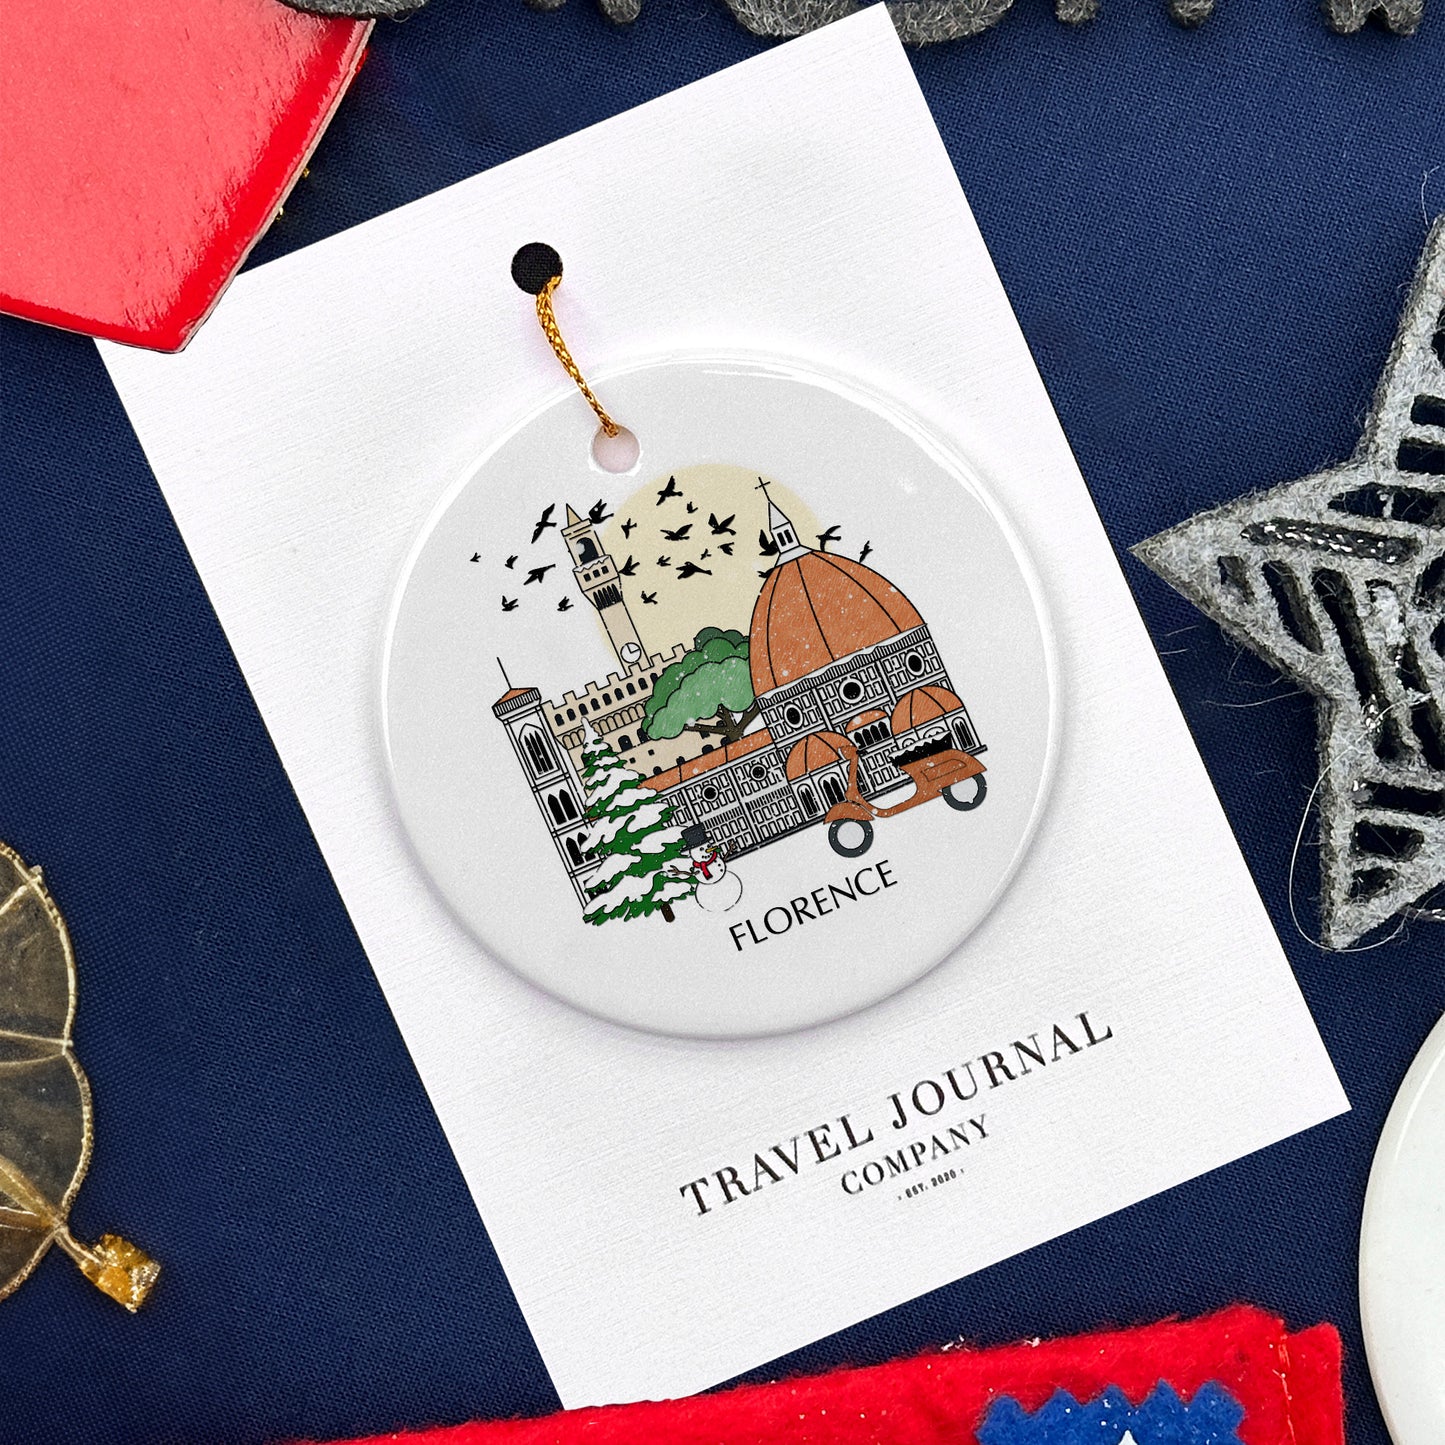 Florence Italy Personalised Christmas Tree Ornament